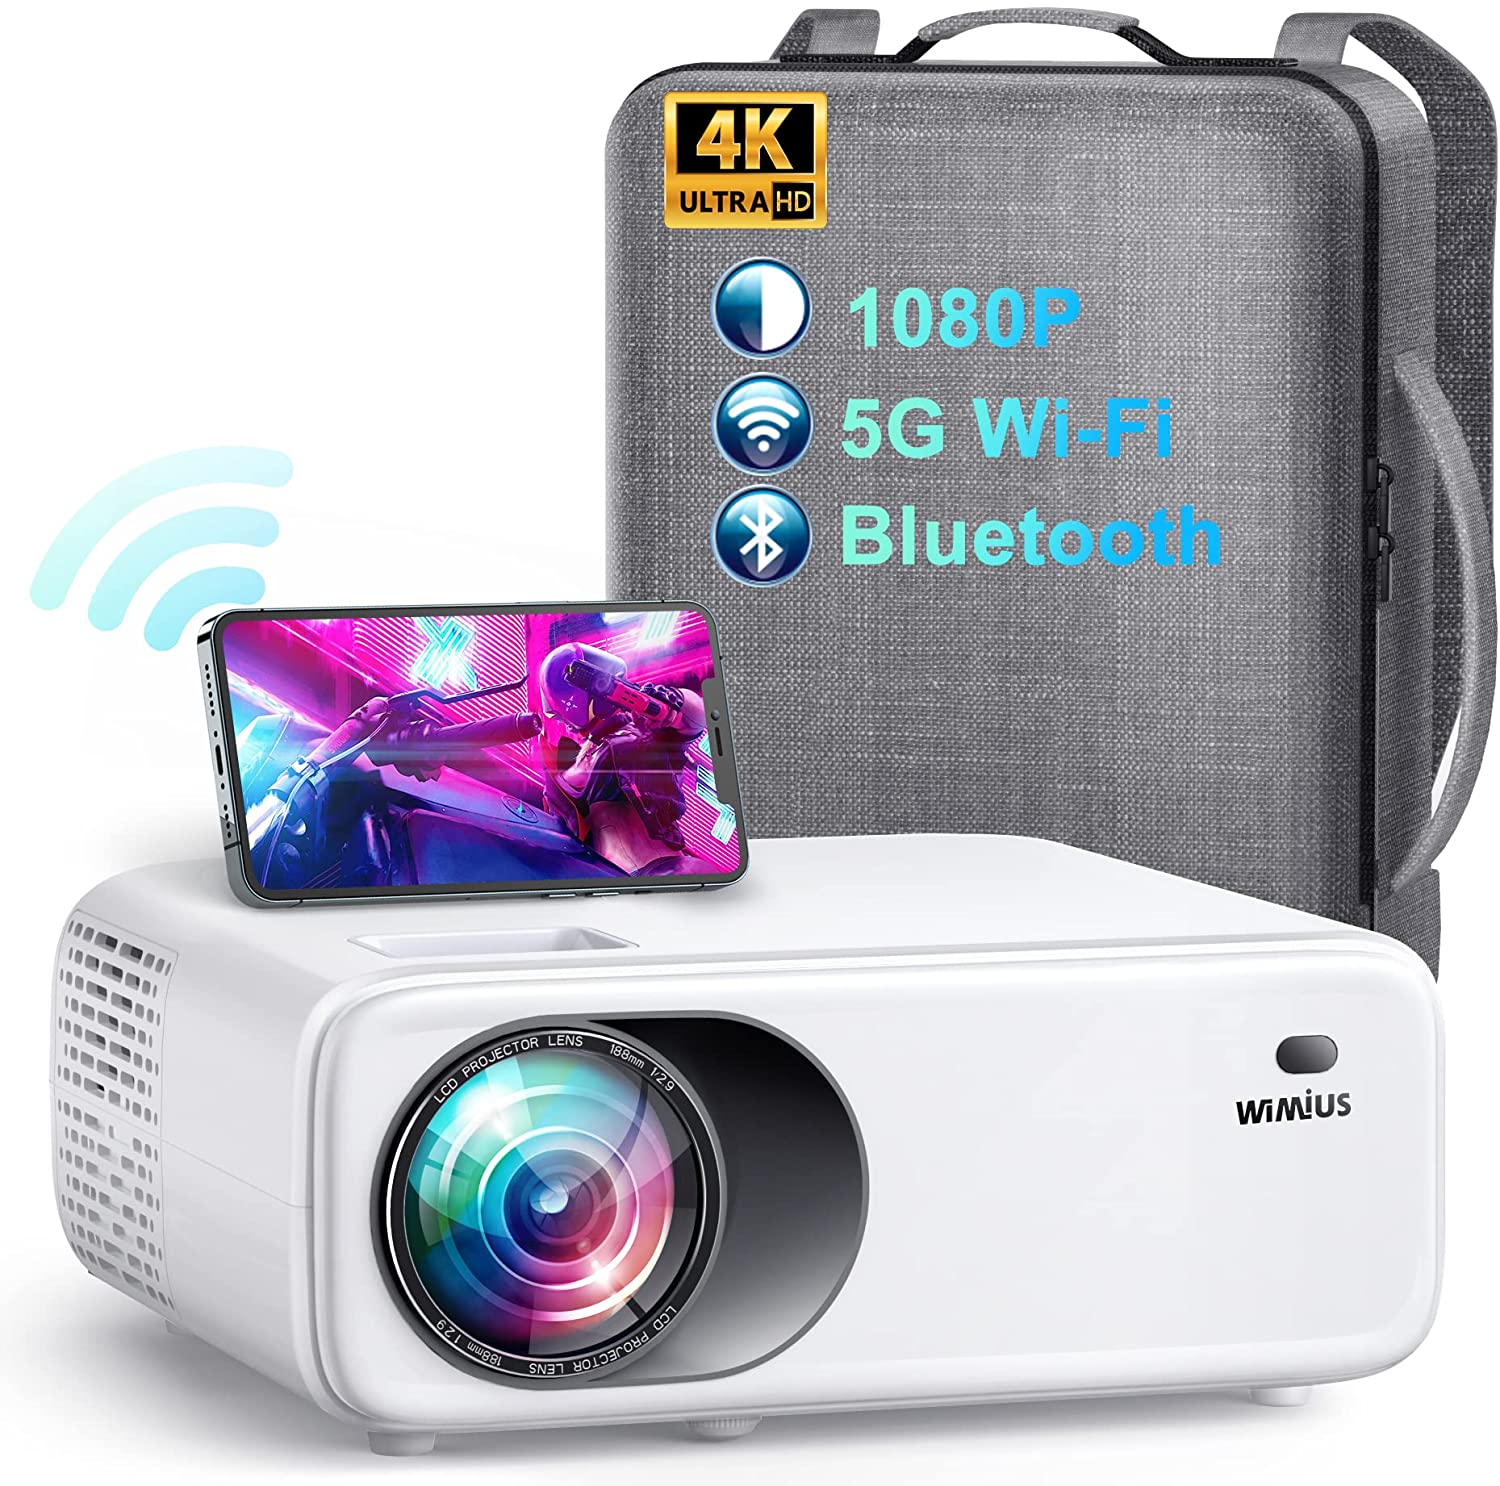 5G WiFi Bluetooth Projector, WiMiUS W6 Native Full HD 1080P Projector Support 4K, 400 ANSI Lumen, 4P/4D Keystone, 50% Zoom, Outdoor Movie Projector Home Theater Video Projector for PPT, TV Stick, PS4